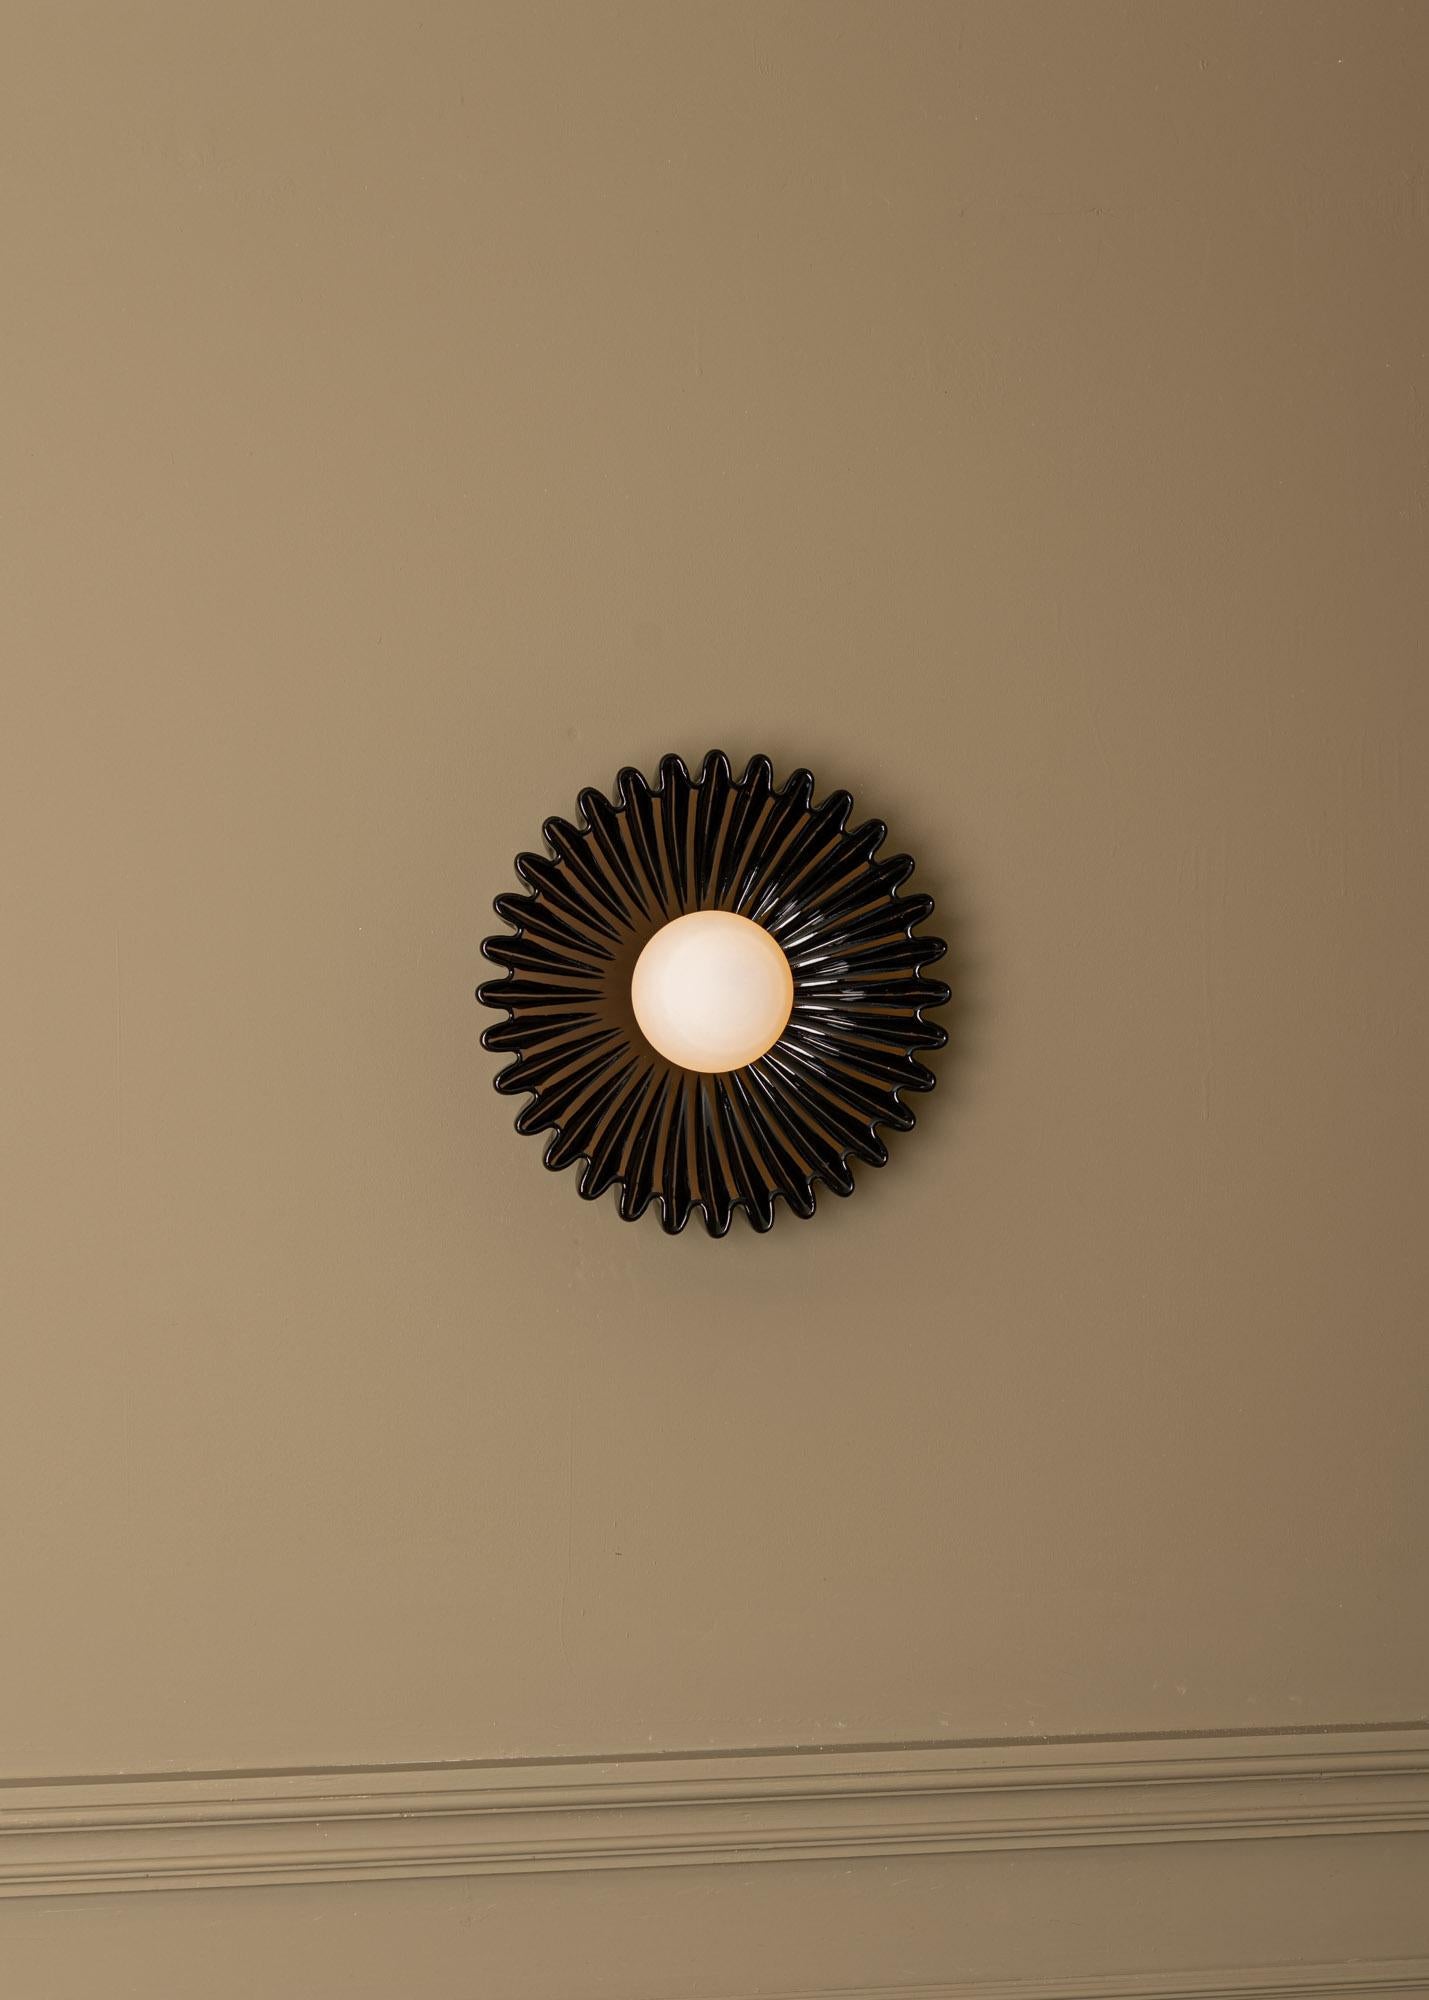 Ostro Black Ceramic Wall Sconce by Simone & Marcel
Dimensions: D 17 x W 31 x H 31 cm.
Materials: Ceramic and glass.

Available in different ceramic and marble options and finishes. Custom options available on request. Please contact us. 

All our